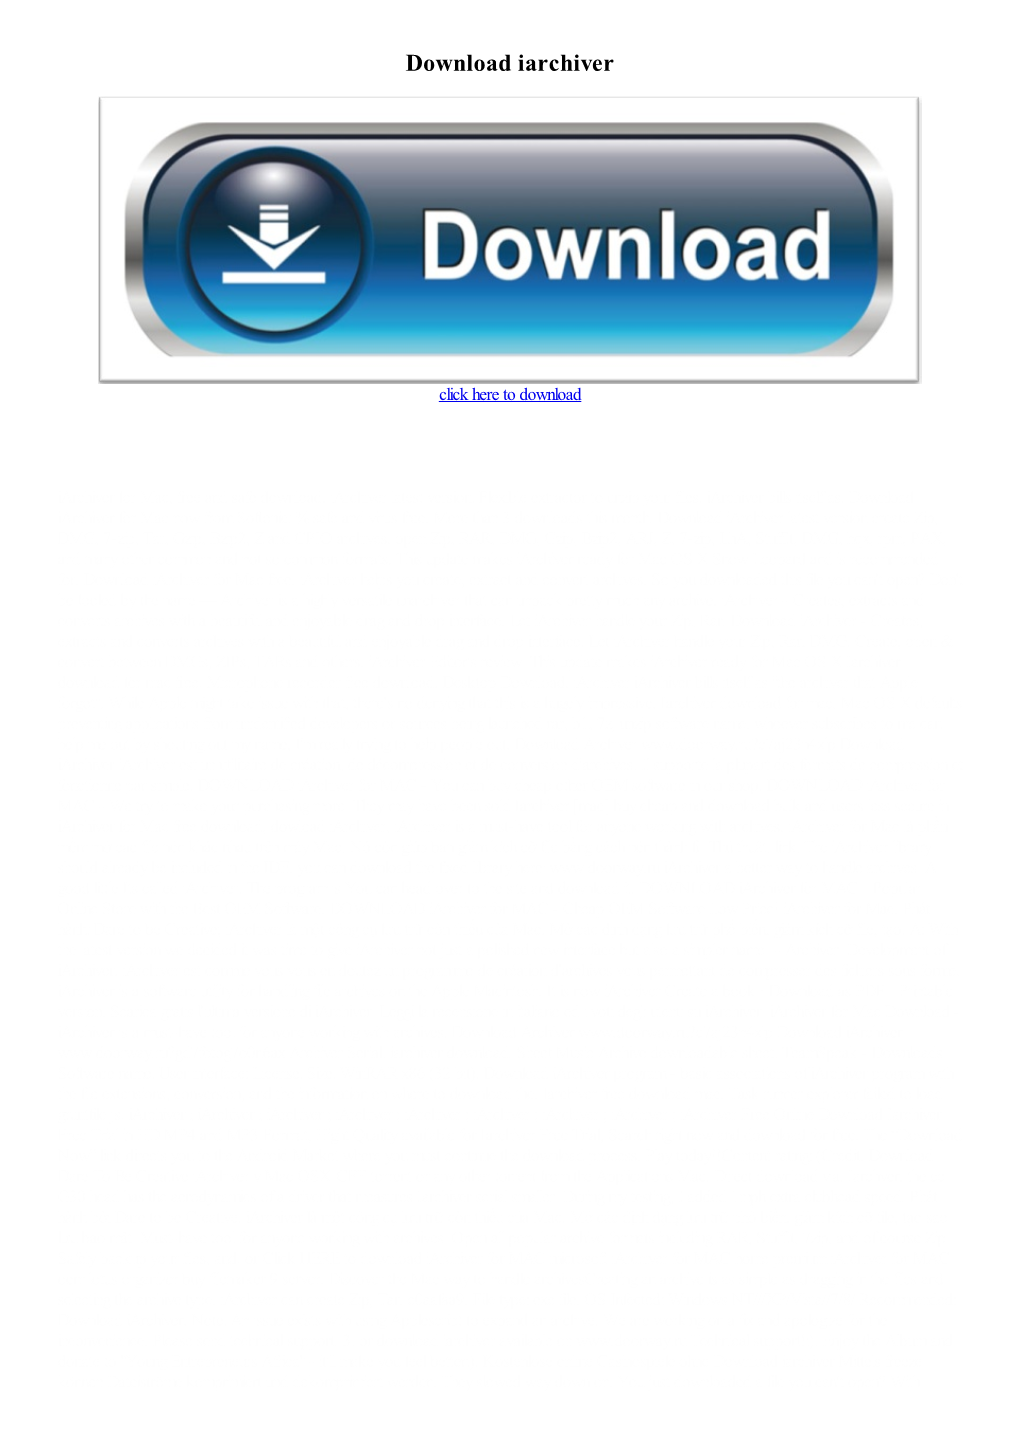 Download Iarchiver